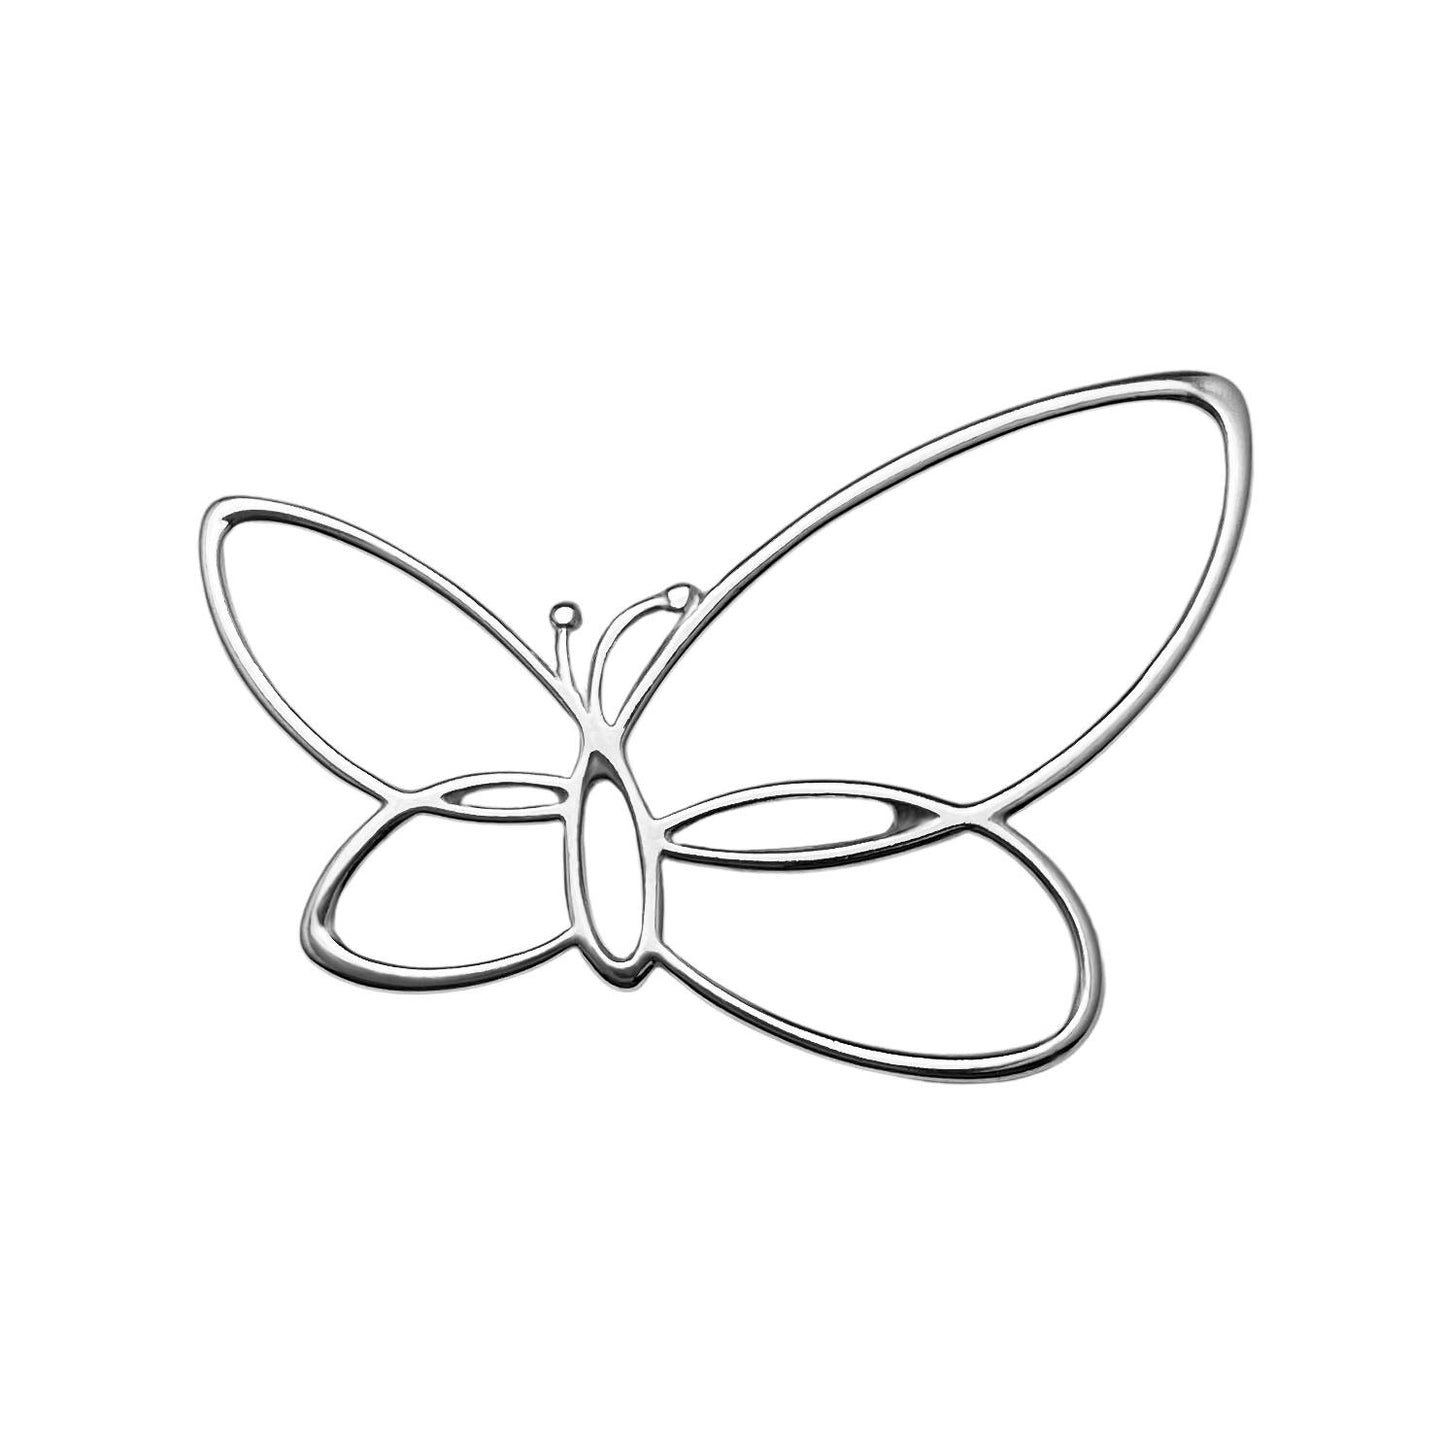 Large Butterfly Charm (3 Metal Options) - 1 pc.-The Bead Gallery Honolulu